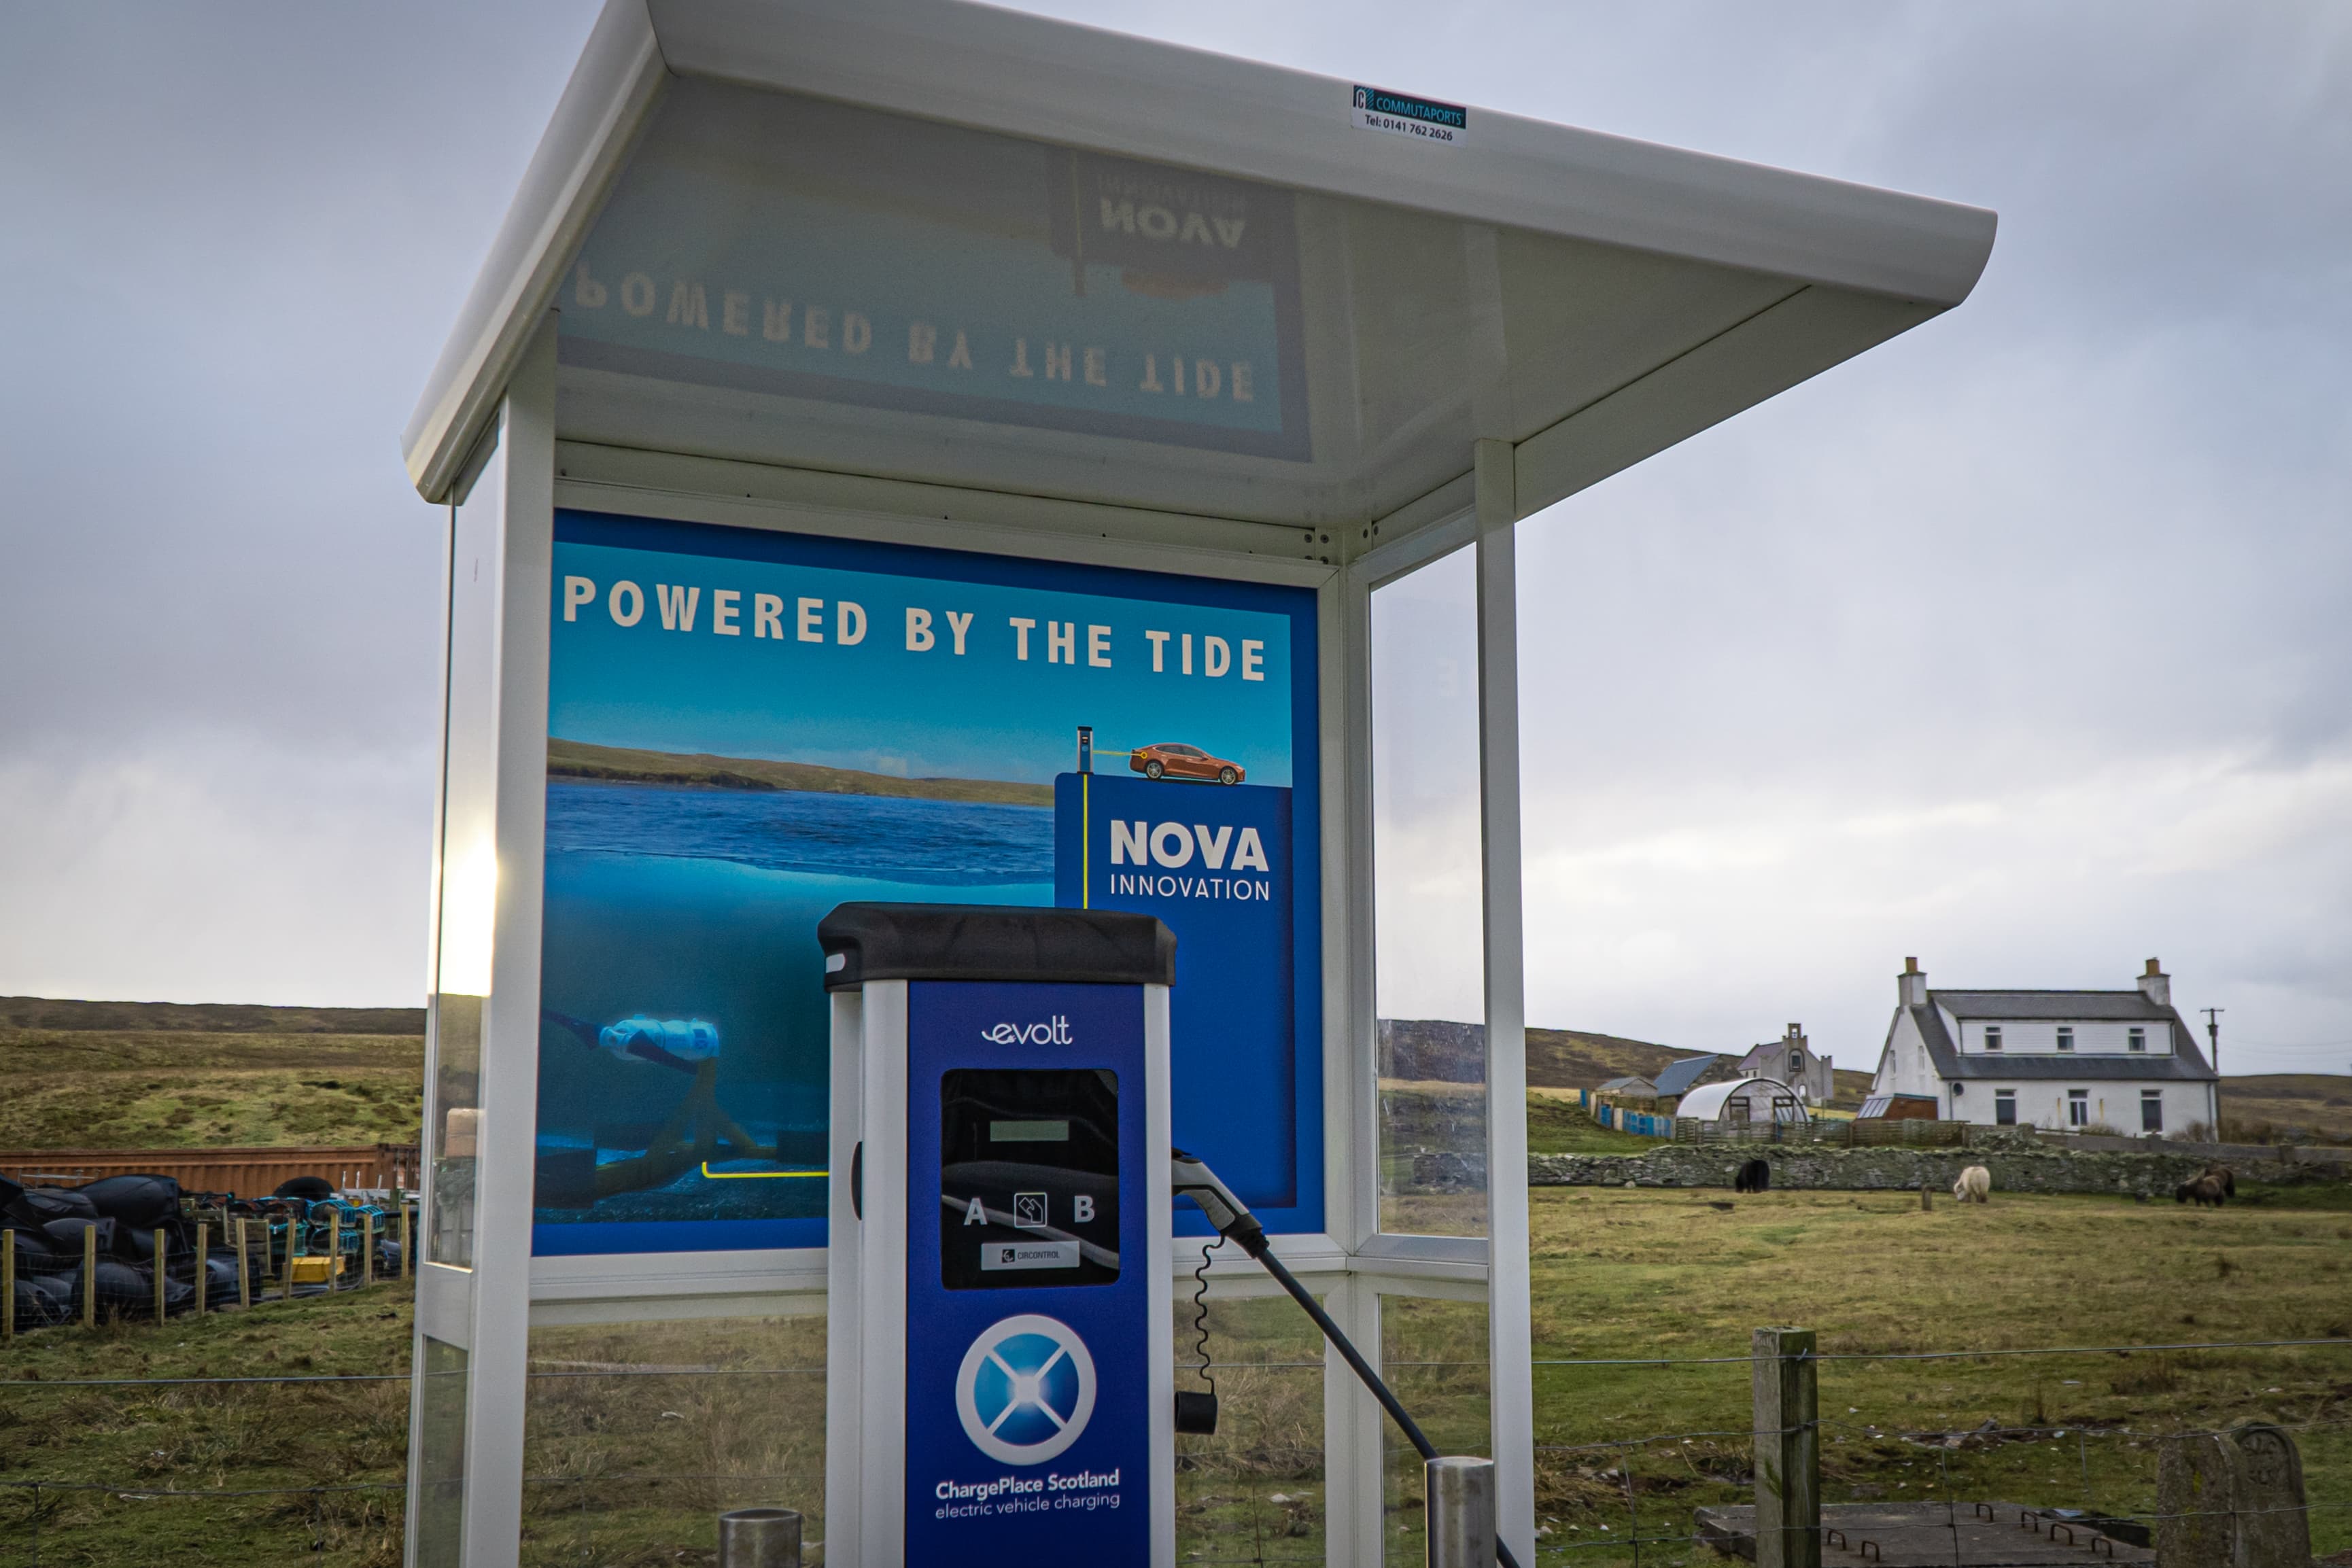 Tidal energy provides juice for electric vehicles on an island